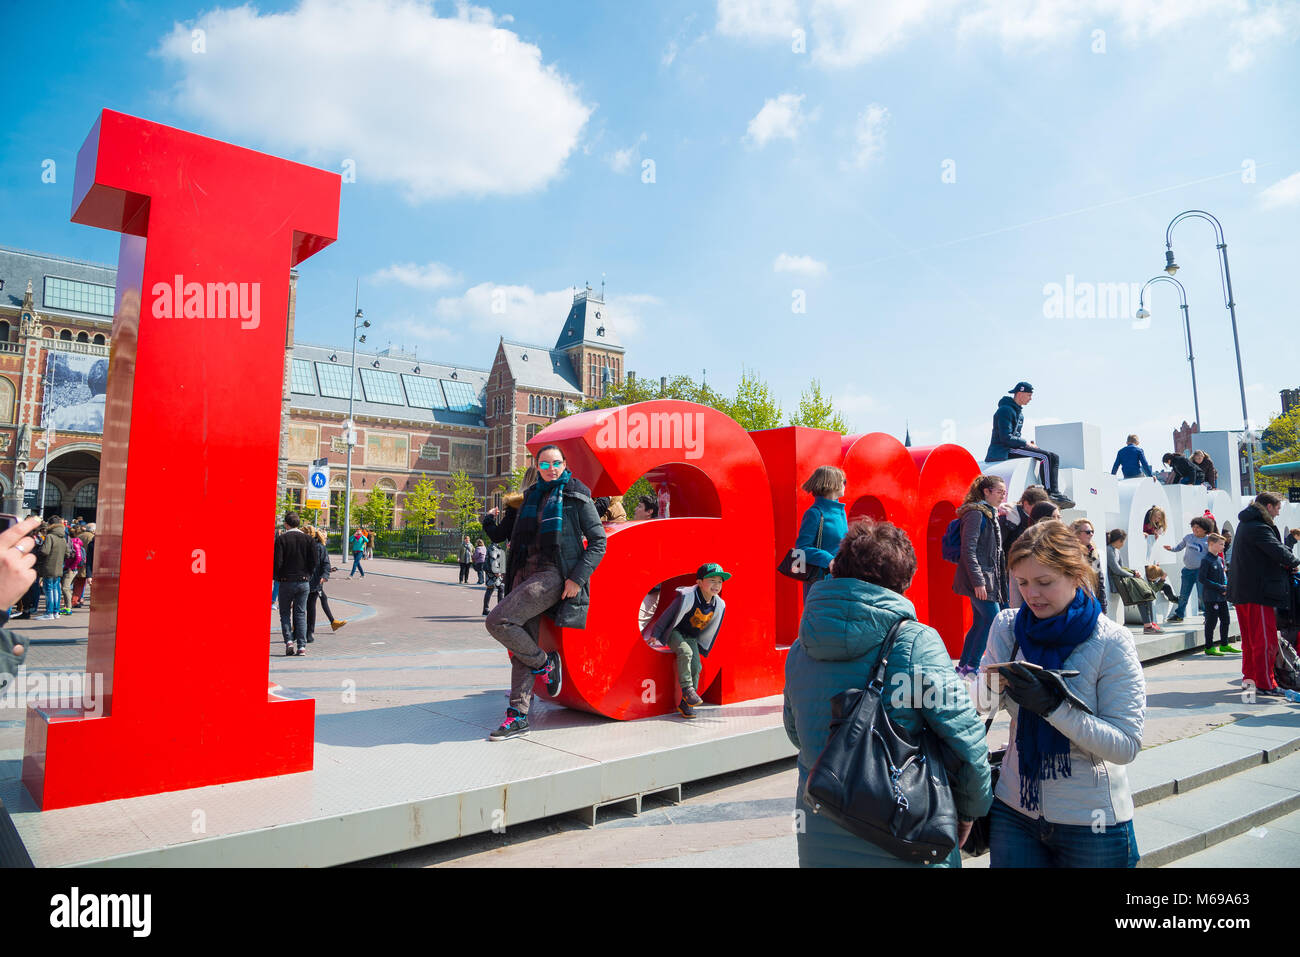 Amsterdam, Netherlands - April 20, 2017: Rijksmuseum and Statue I am Amsterdam at day, Netherlands Stock Photo